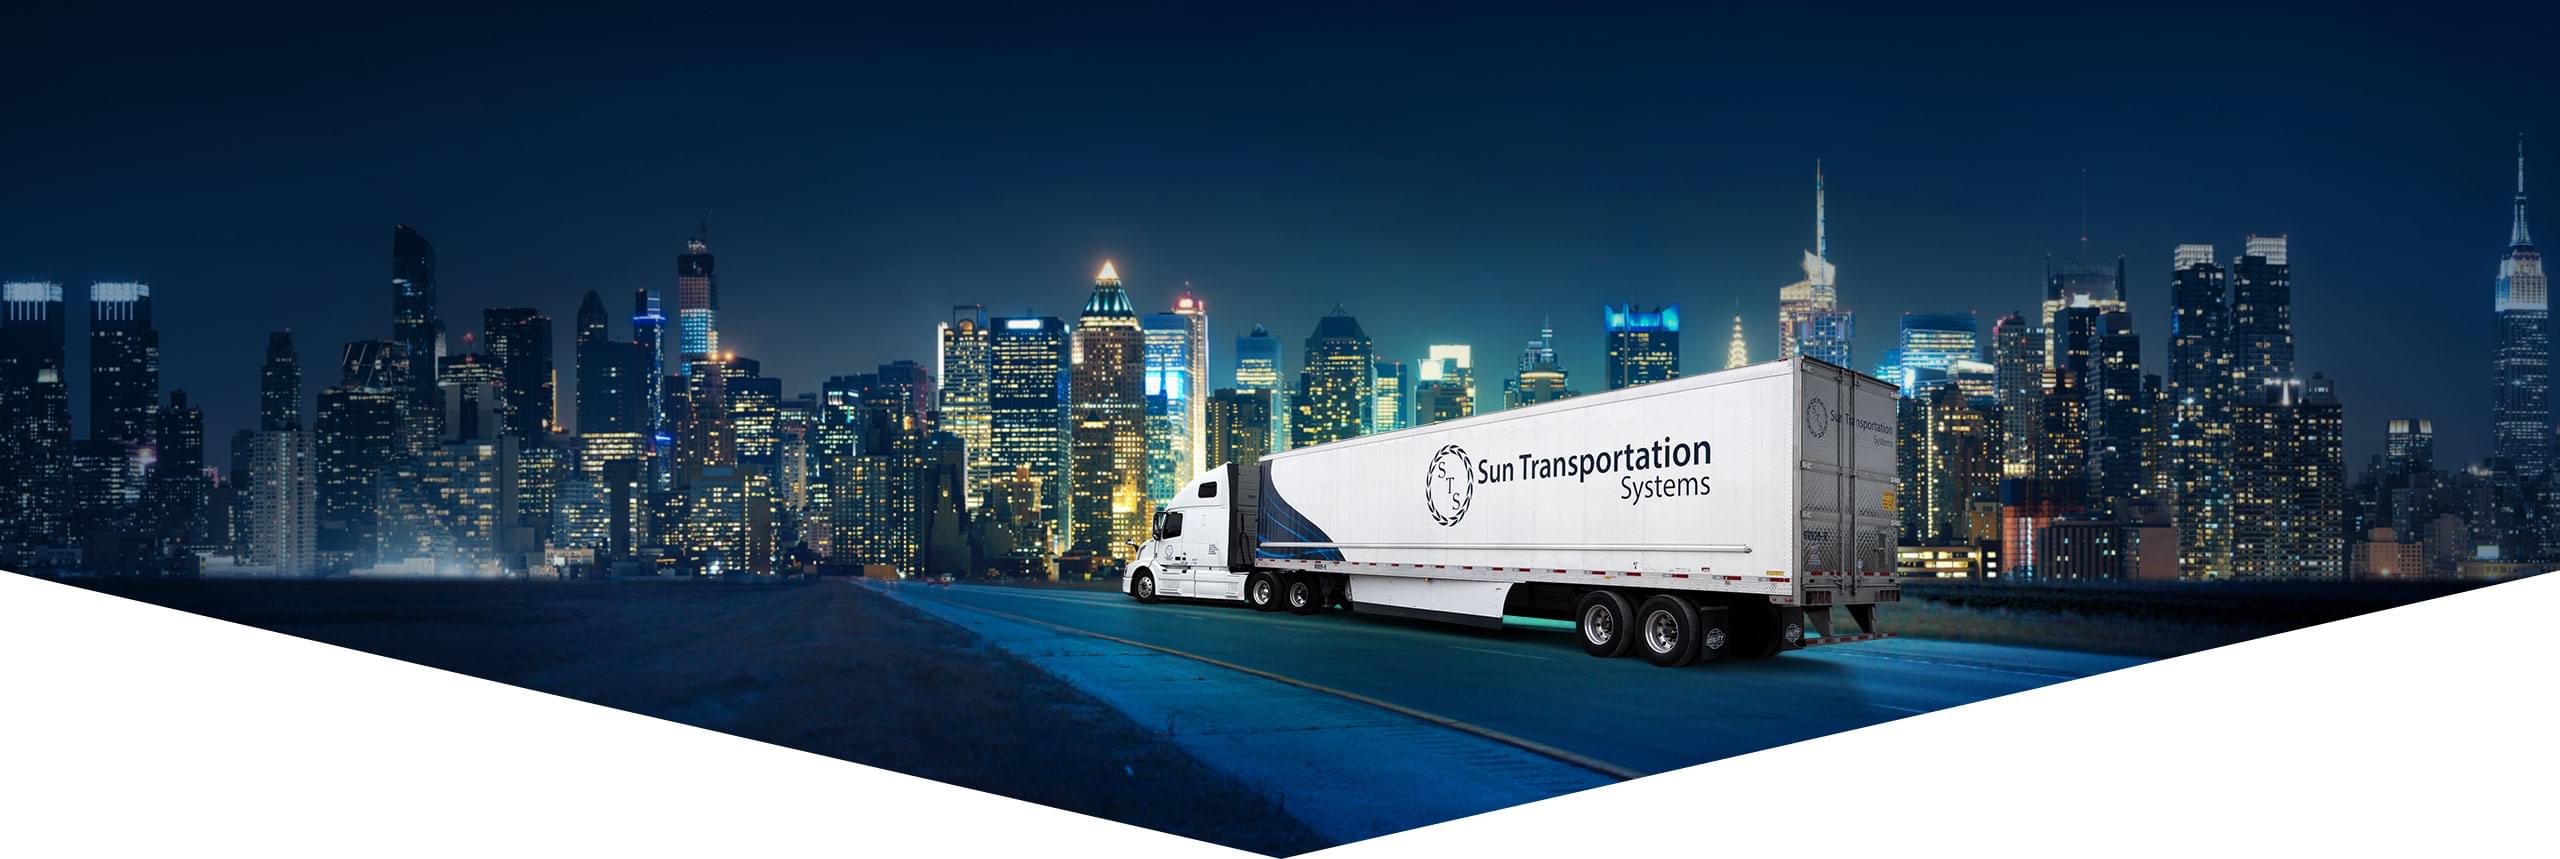 Sun Transportation Systems transport truck driving on highway into a USA city.